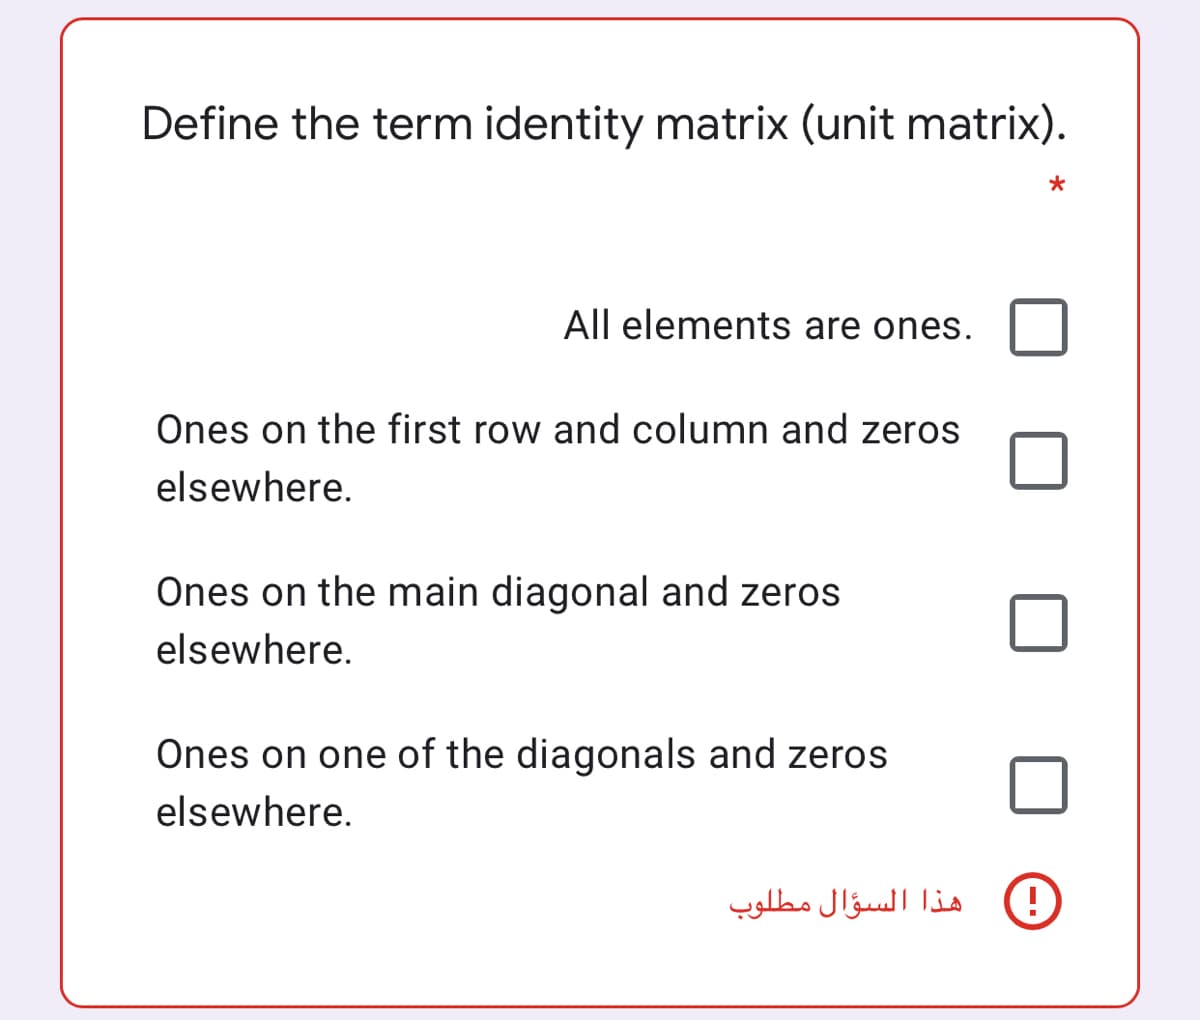 Define the term identity matrix (unit matrix).
All elements are ones.
Ones on the first row and column and zeros
elsewhere.
Ones on the main diagonal and zeros
elsewhere.
Ones on one of the diagonals and zeros
elsewhere.
هذا السؤال مطلوب
